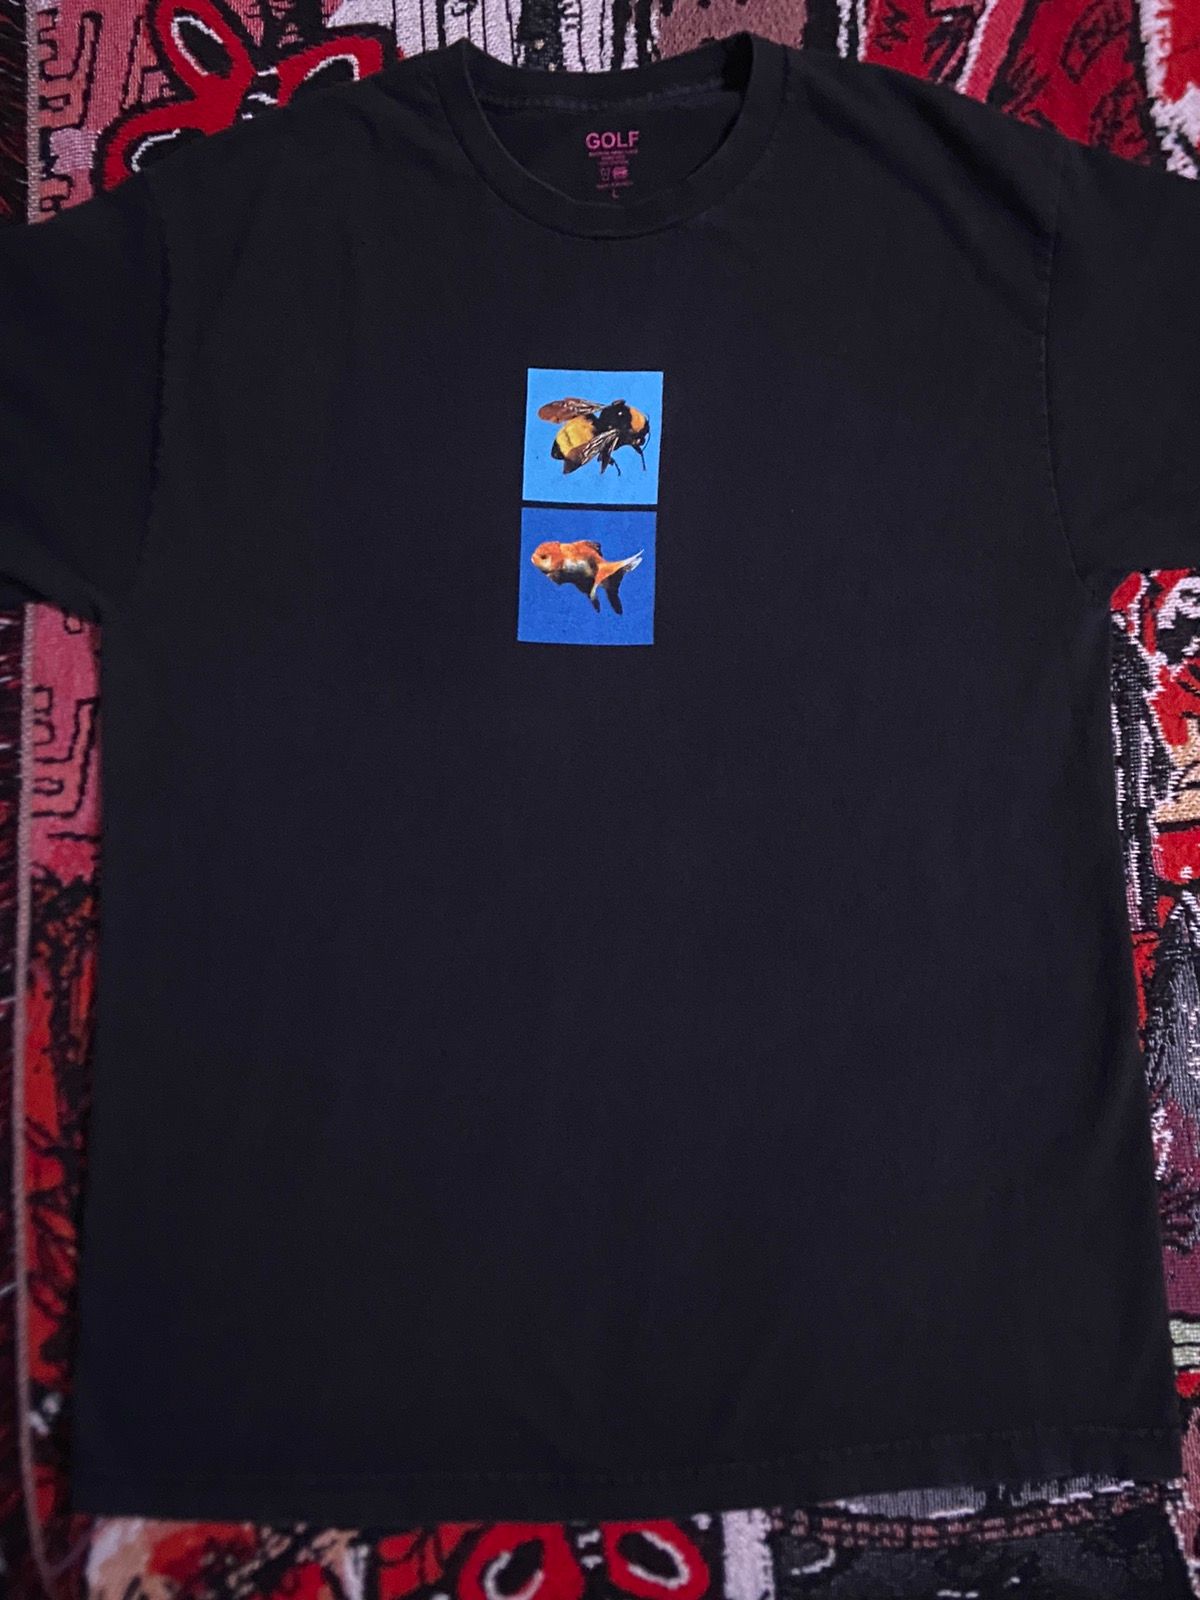 Pre-owned Golf Wang X Tyler The Creator Vince Staples Tour Tee In Black